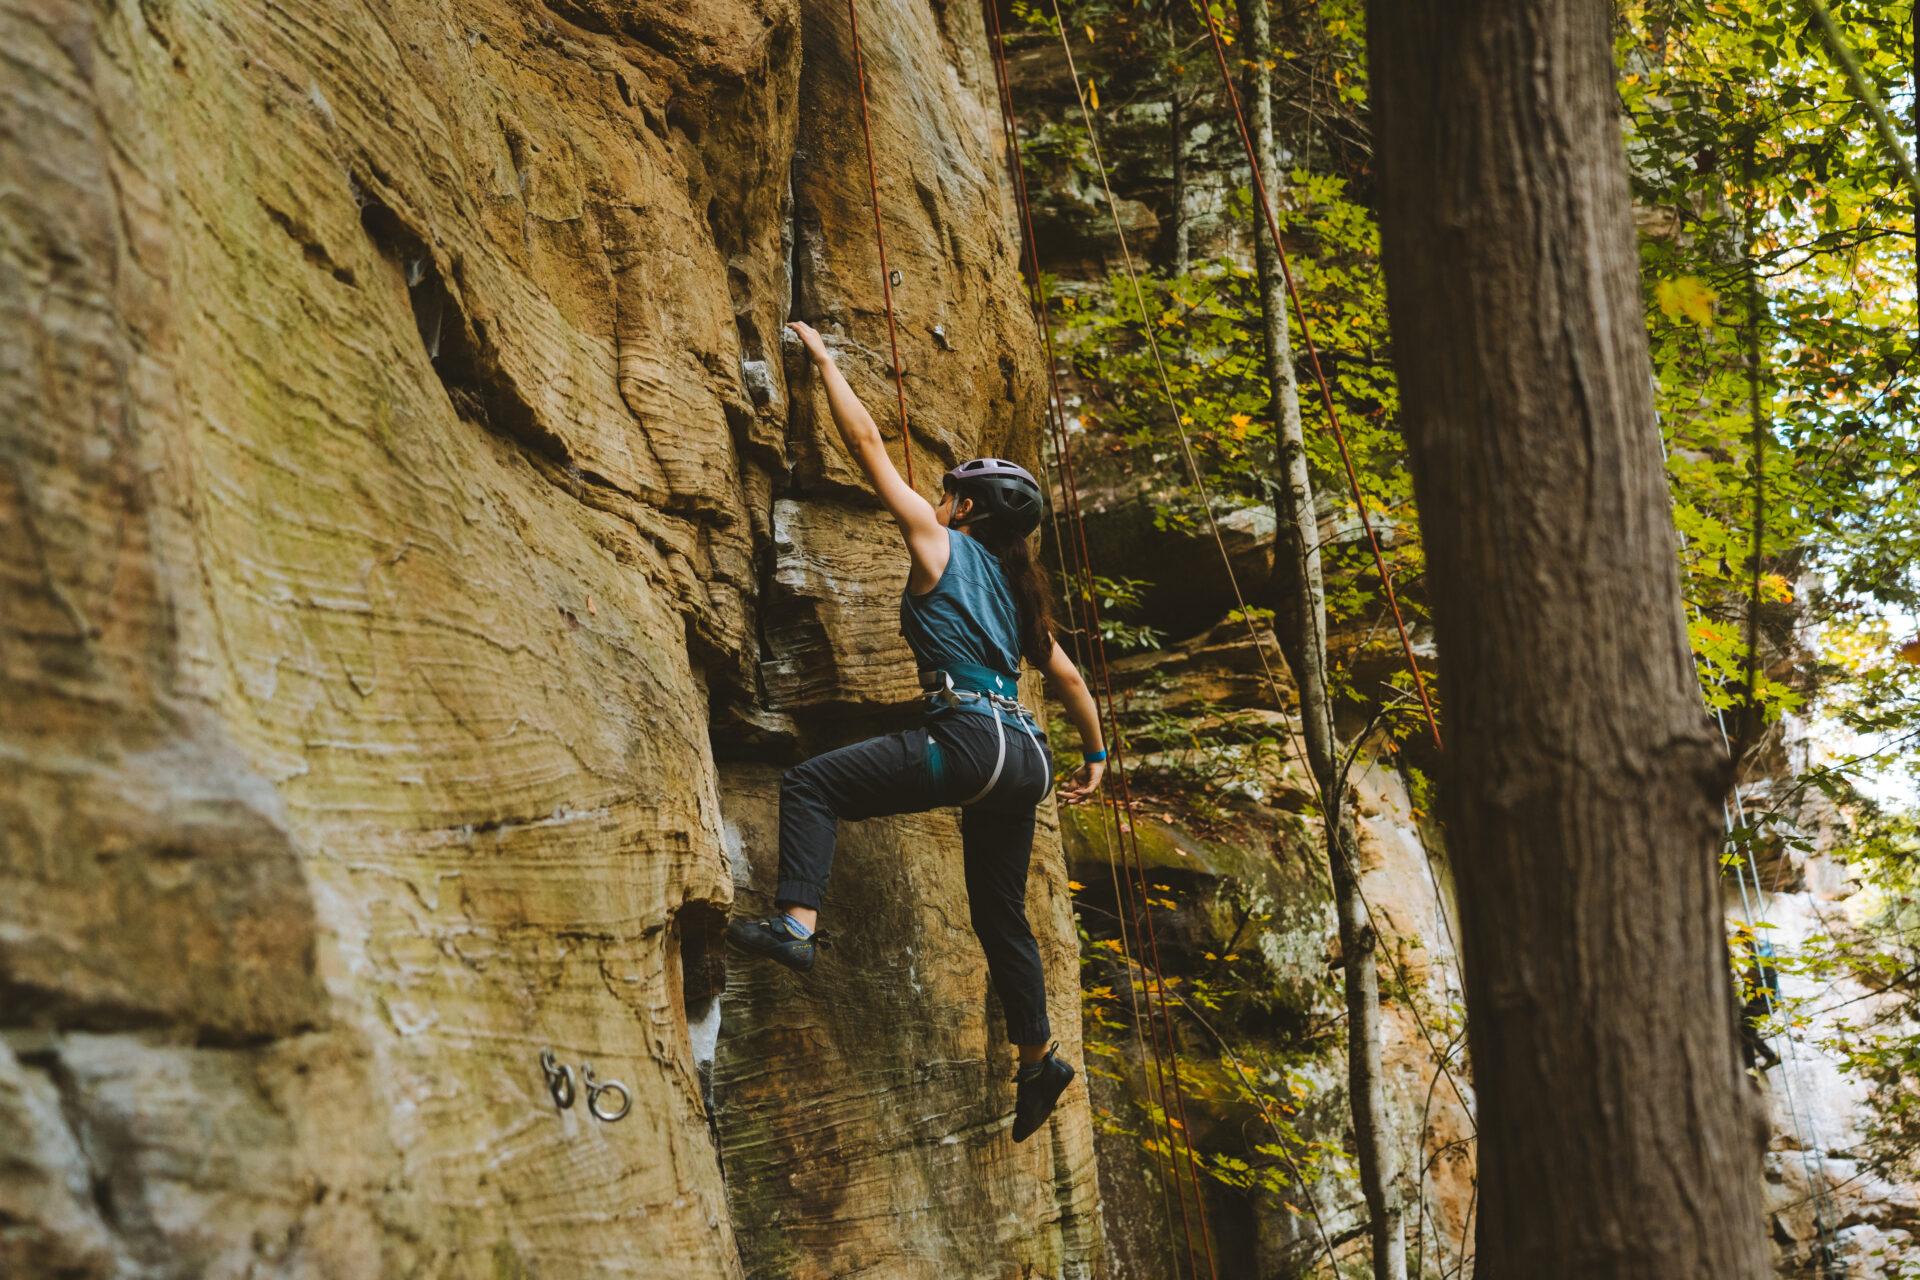 The Climbing Climate And Paddle Making, Inside Appalachia